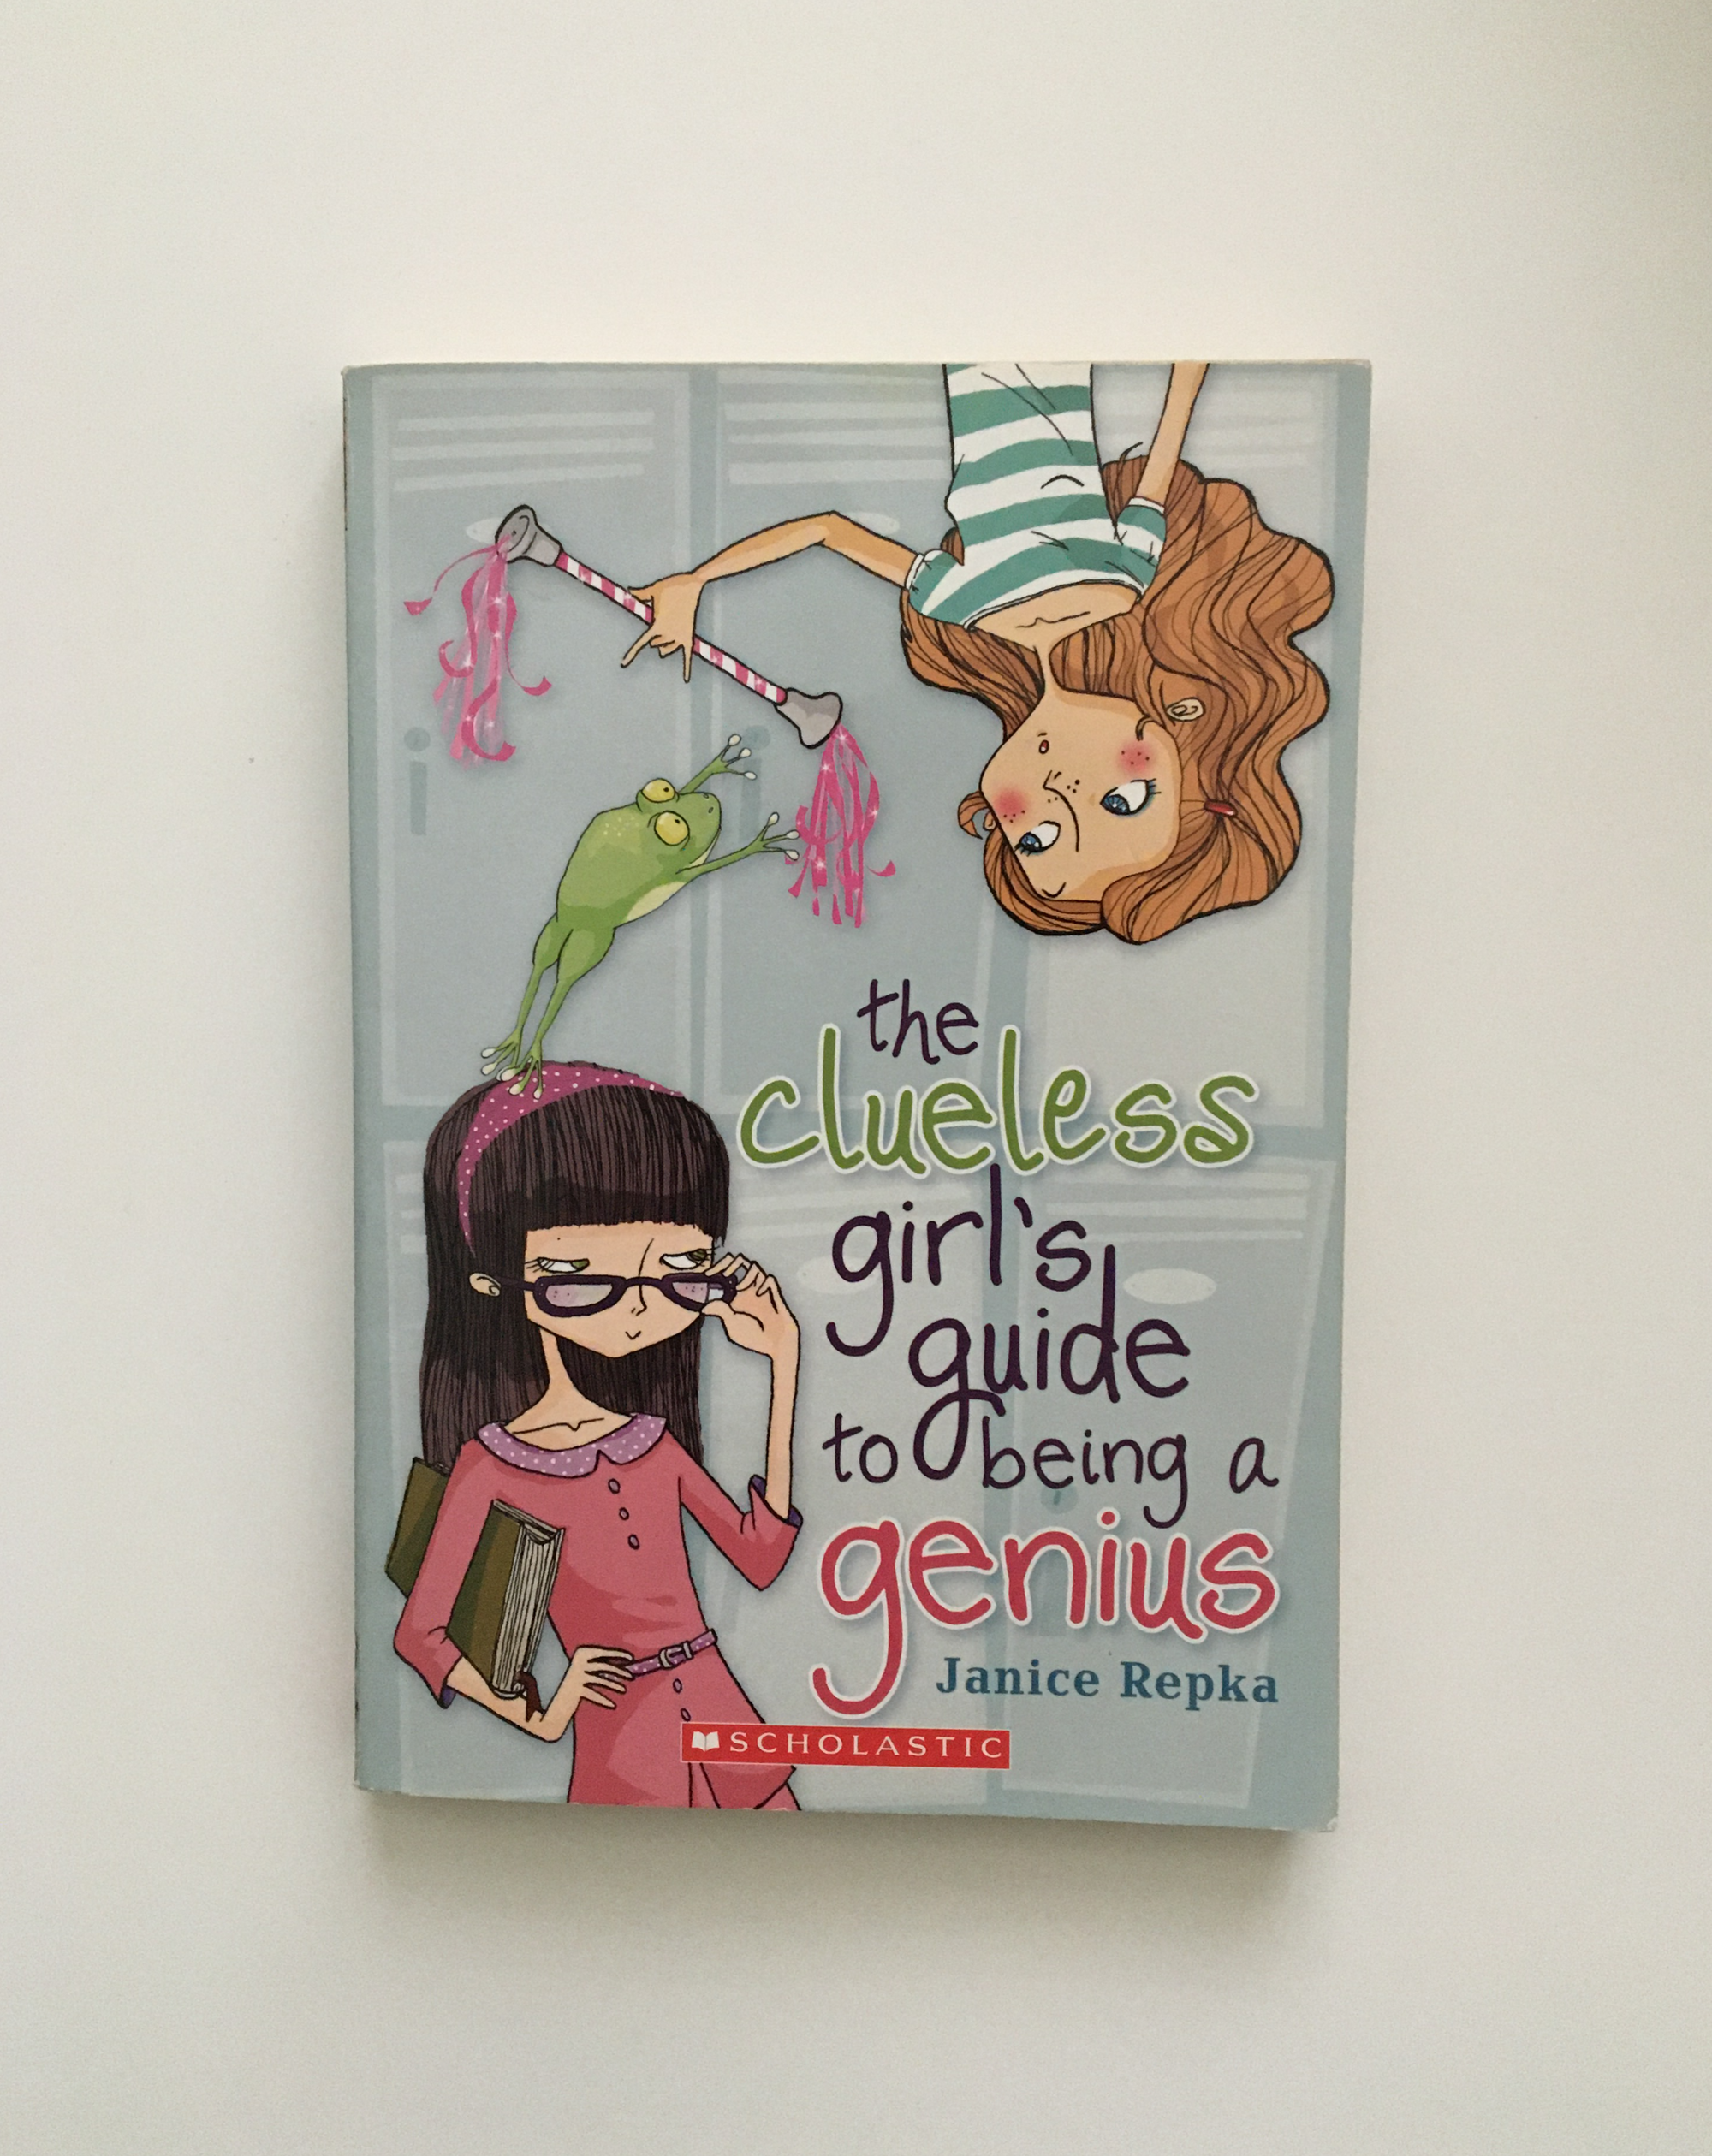 The Clueless Girl's Guide to Being a Genius by Janice Repka, book, Ten Dollar Books, Ten Dollar Books